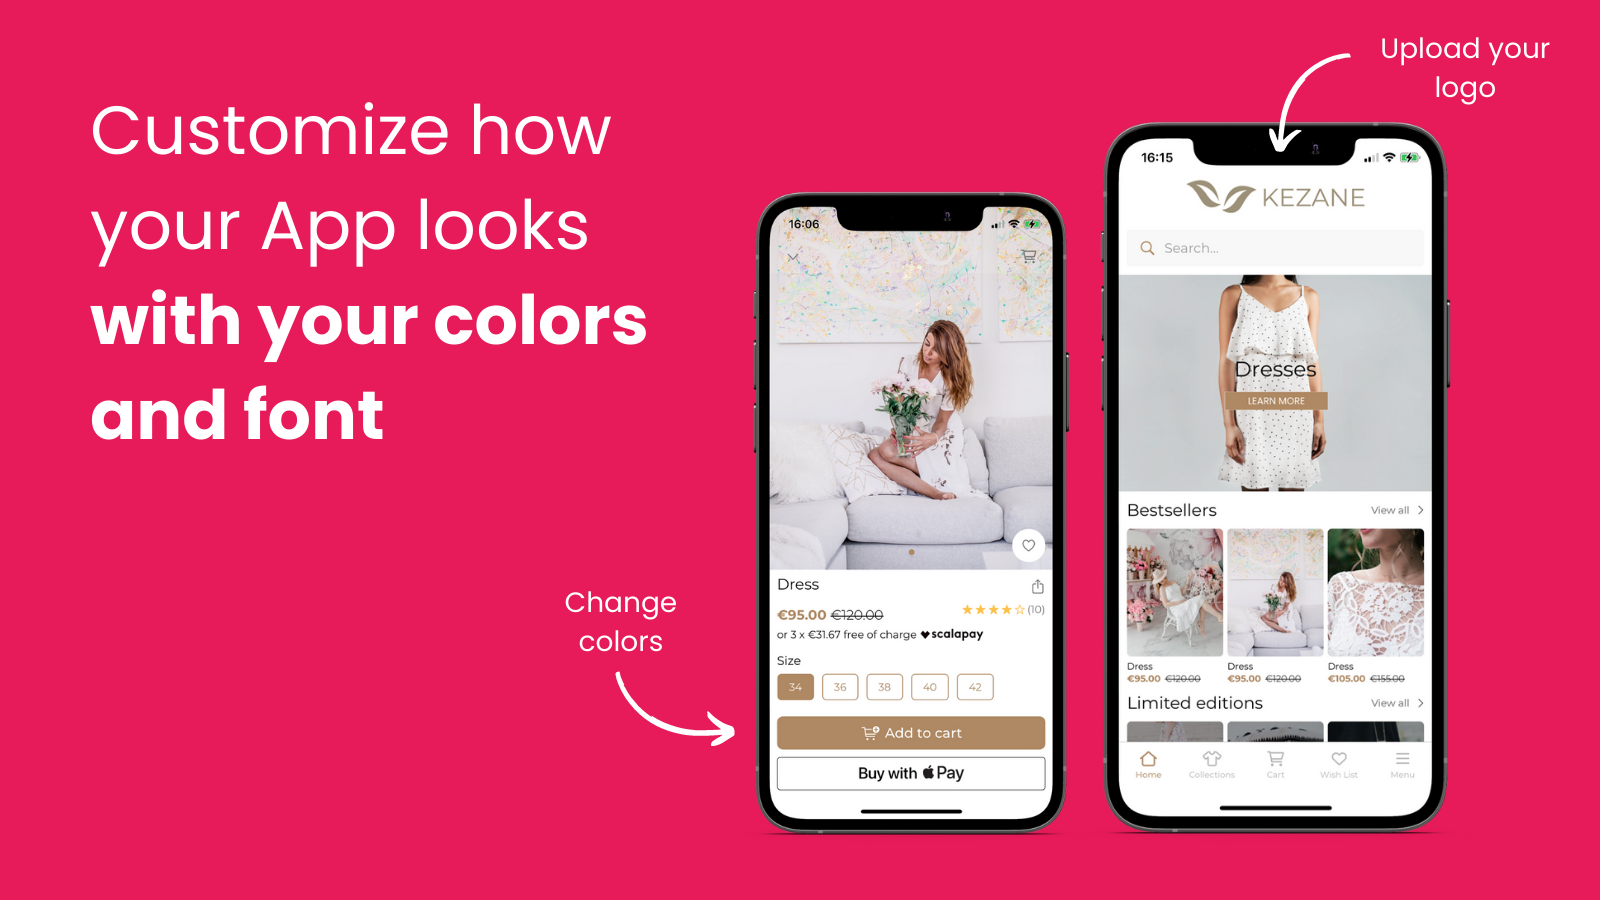 Customize how your App looks with your colors and font